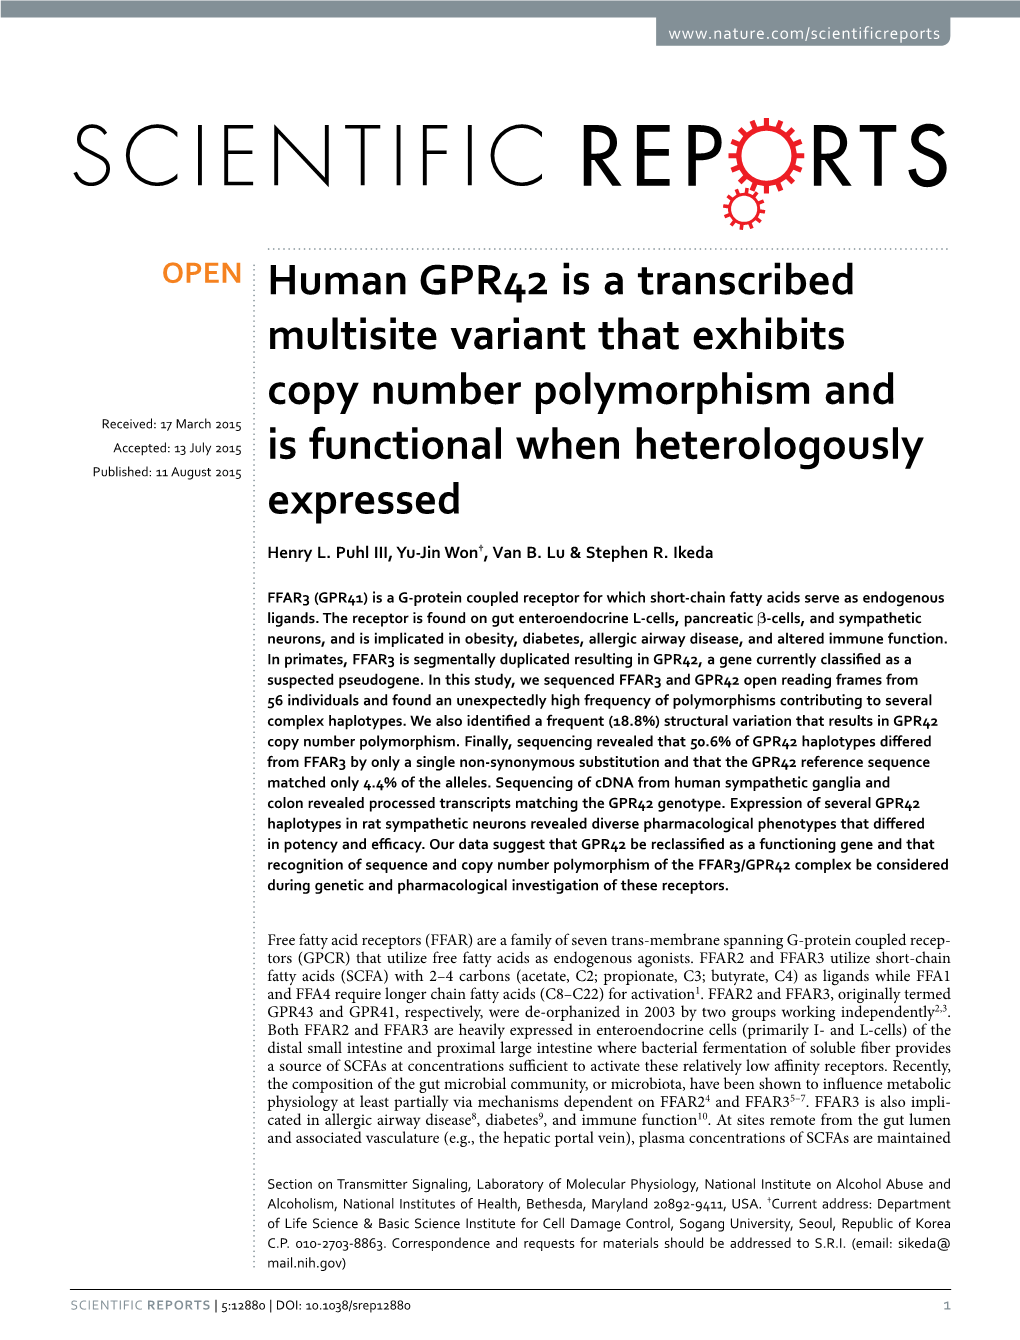 Human GPR42 Is a Transcribed Multisite Variant That Exhibits Copy